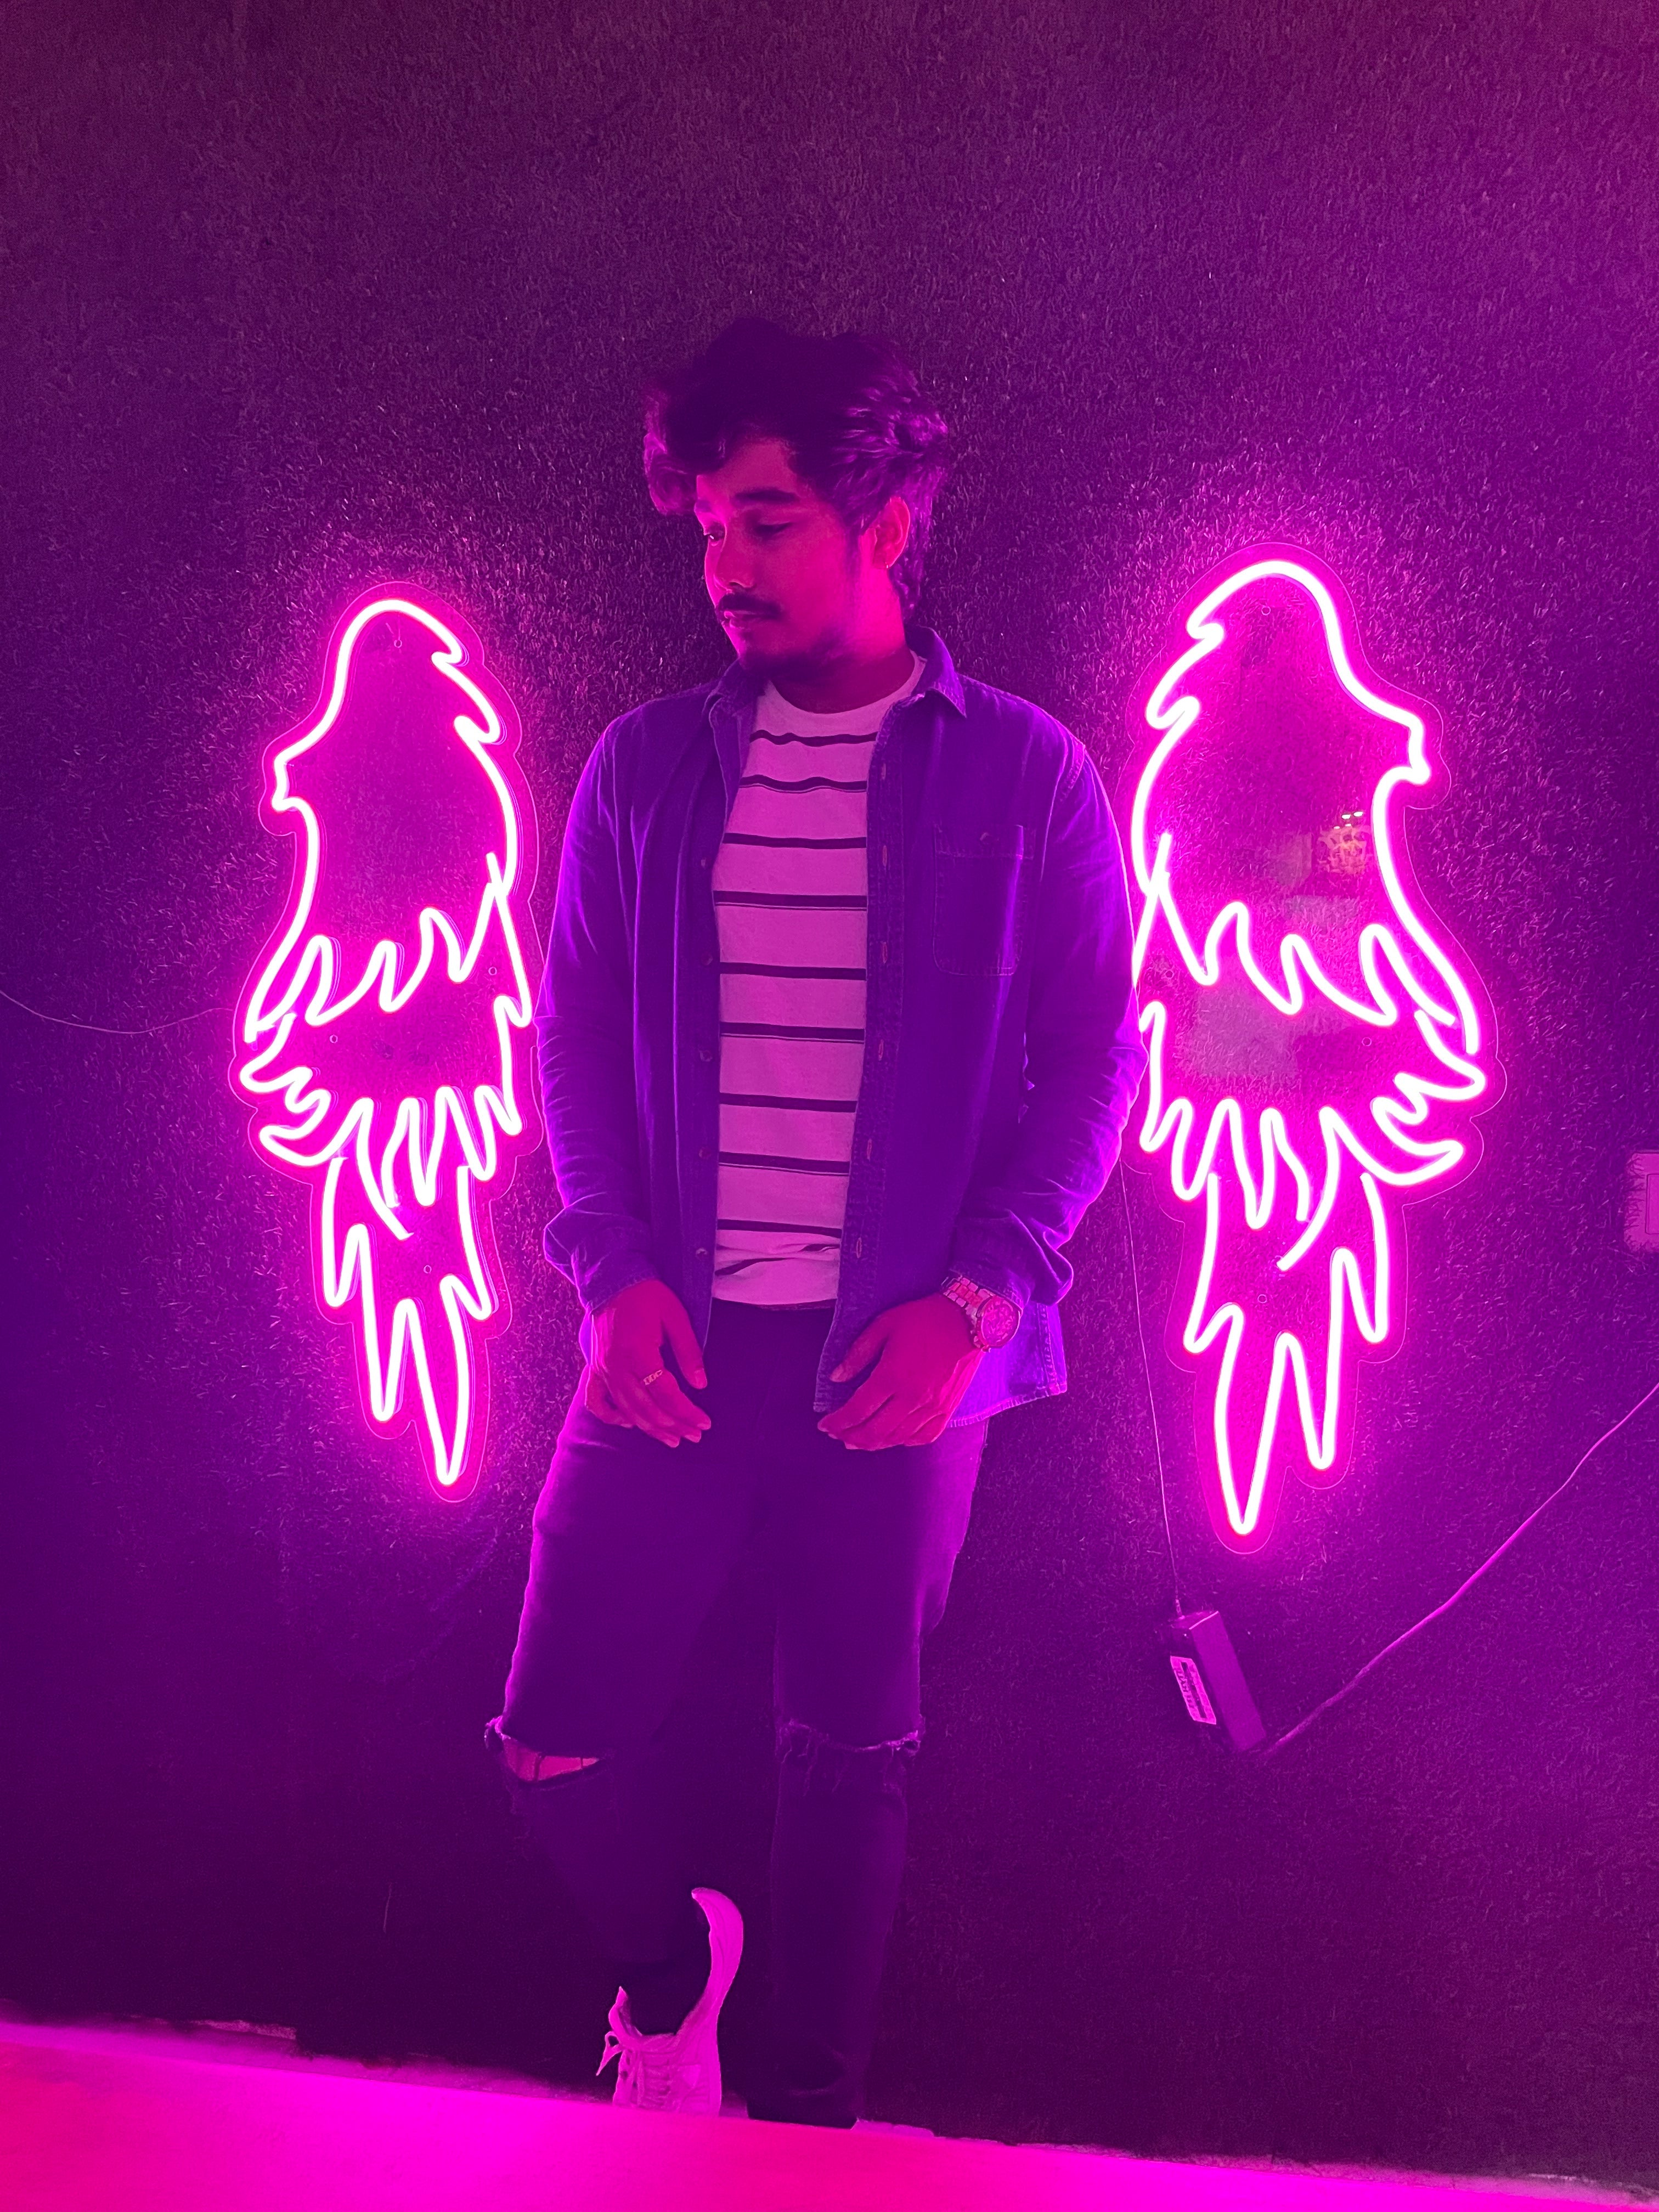 Angle wings - Neon Sign